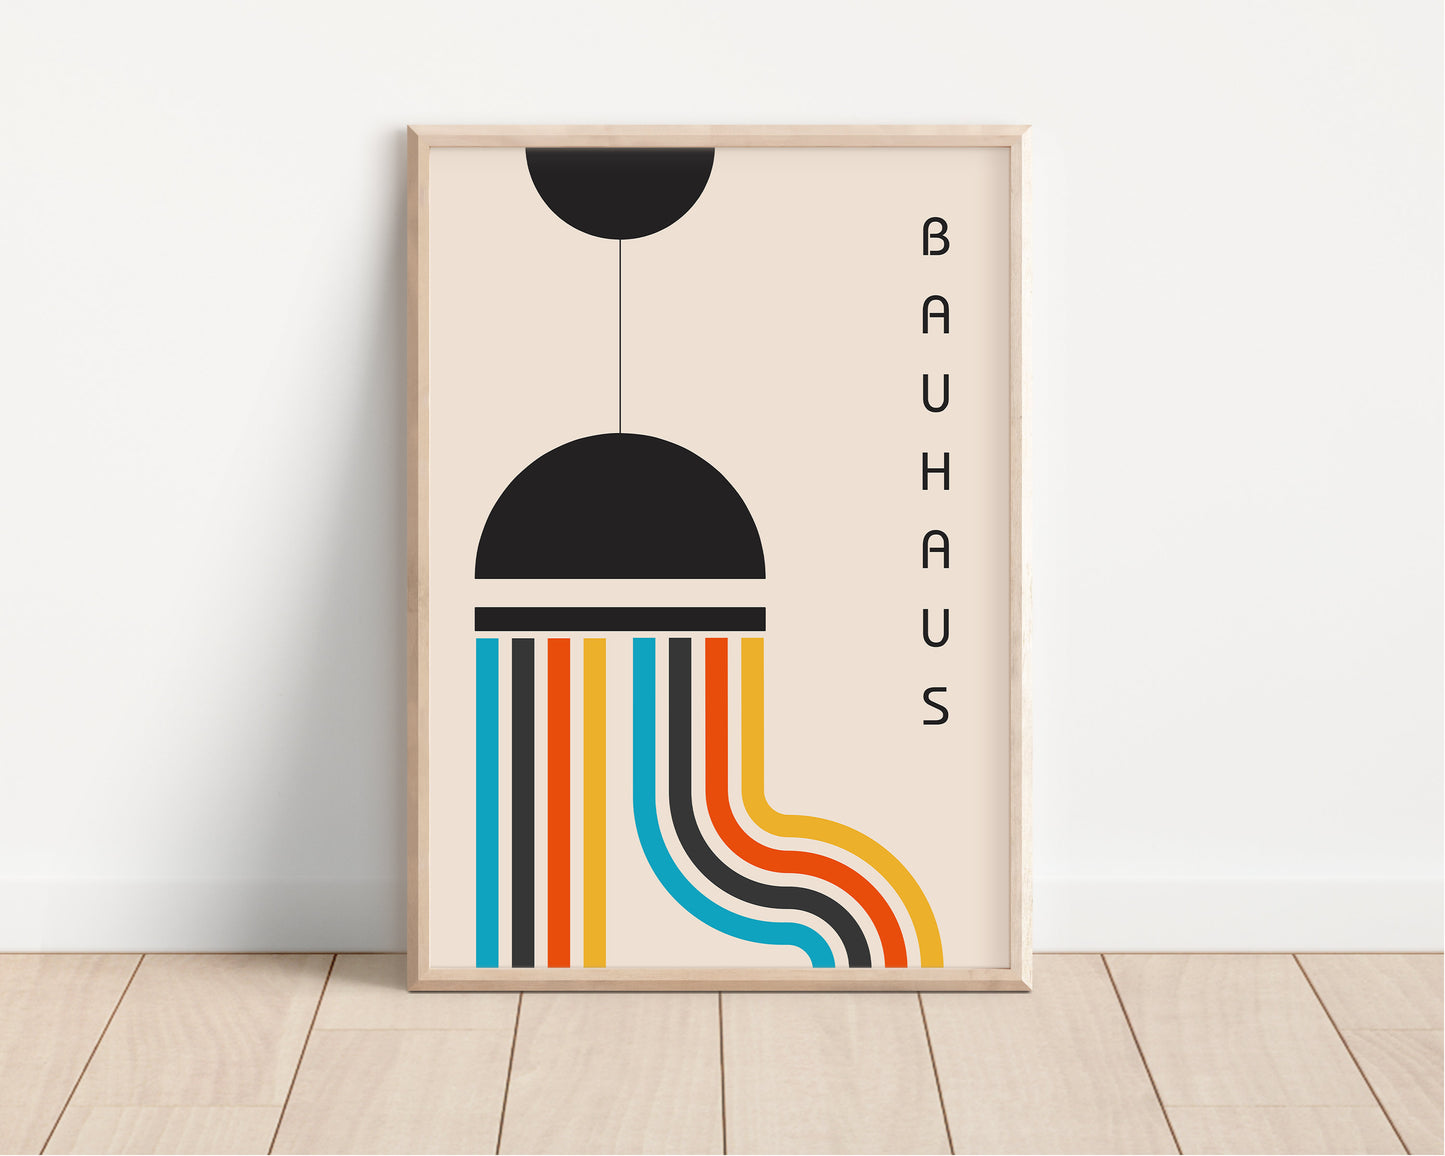 Framed Colorful Bauhaus Poster Mid-Century Modern Print 60s Vintage Minimalist Shapes Abstract Museum Art Ready to hang Home Office Decor